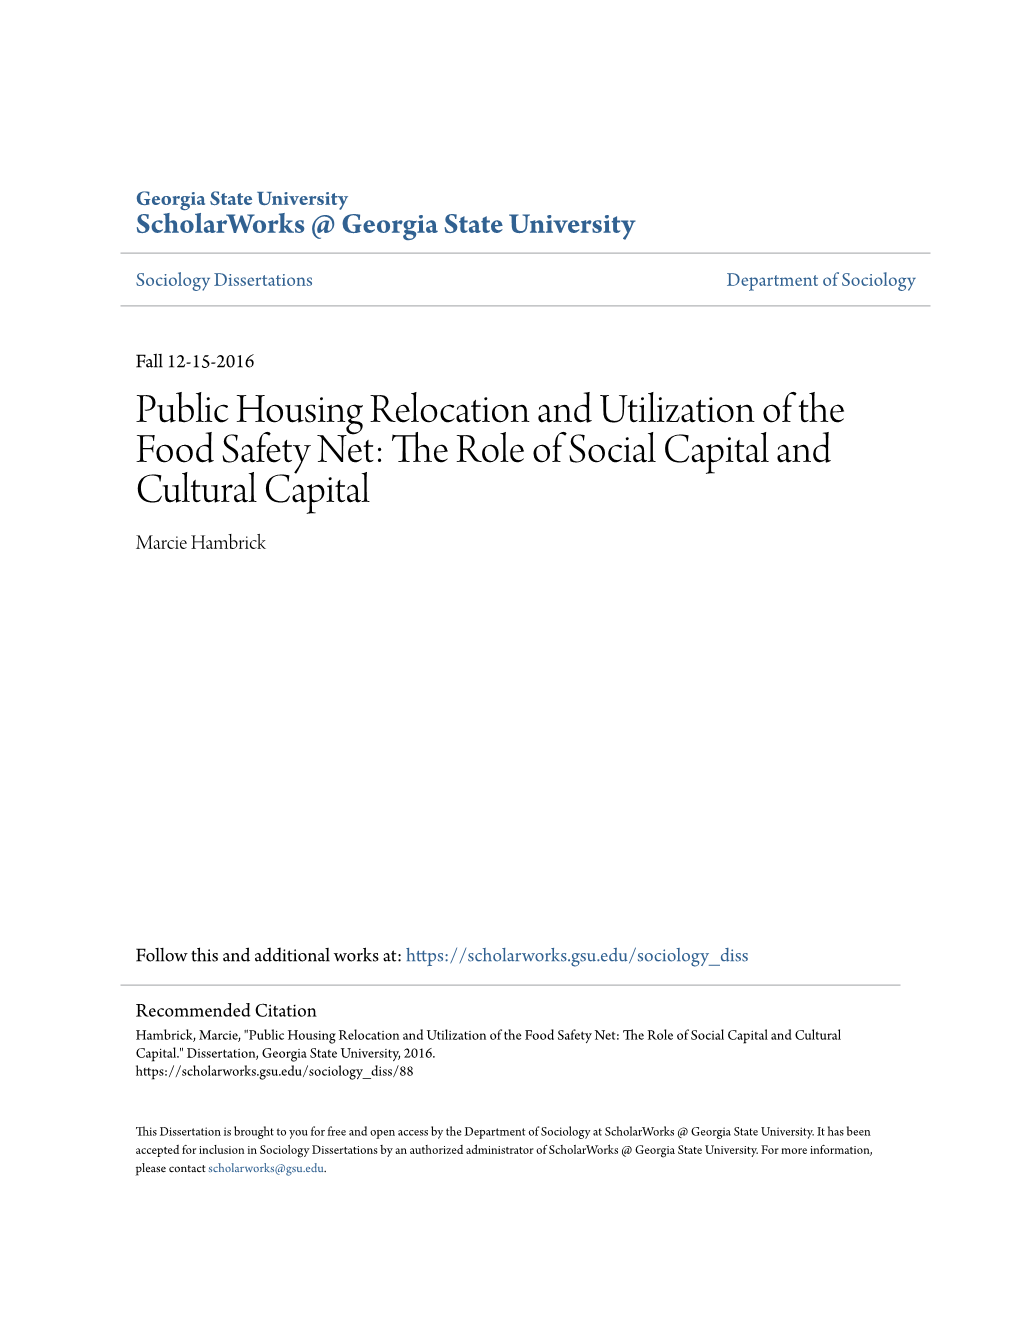 Public Housing Relocation and Utilization of the Food Safety Net: the Role of Social Capital and Cultural Capital Marcie Hambrick